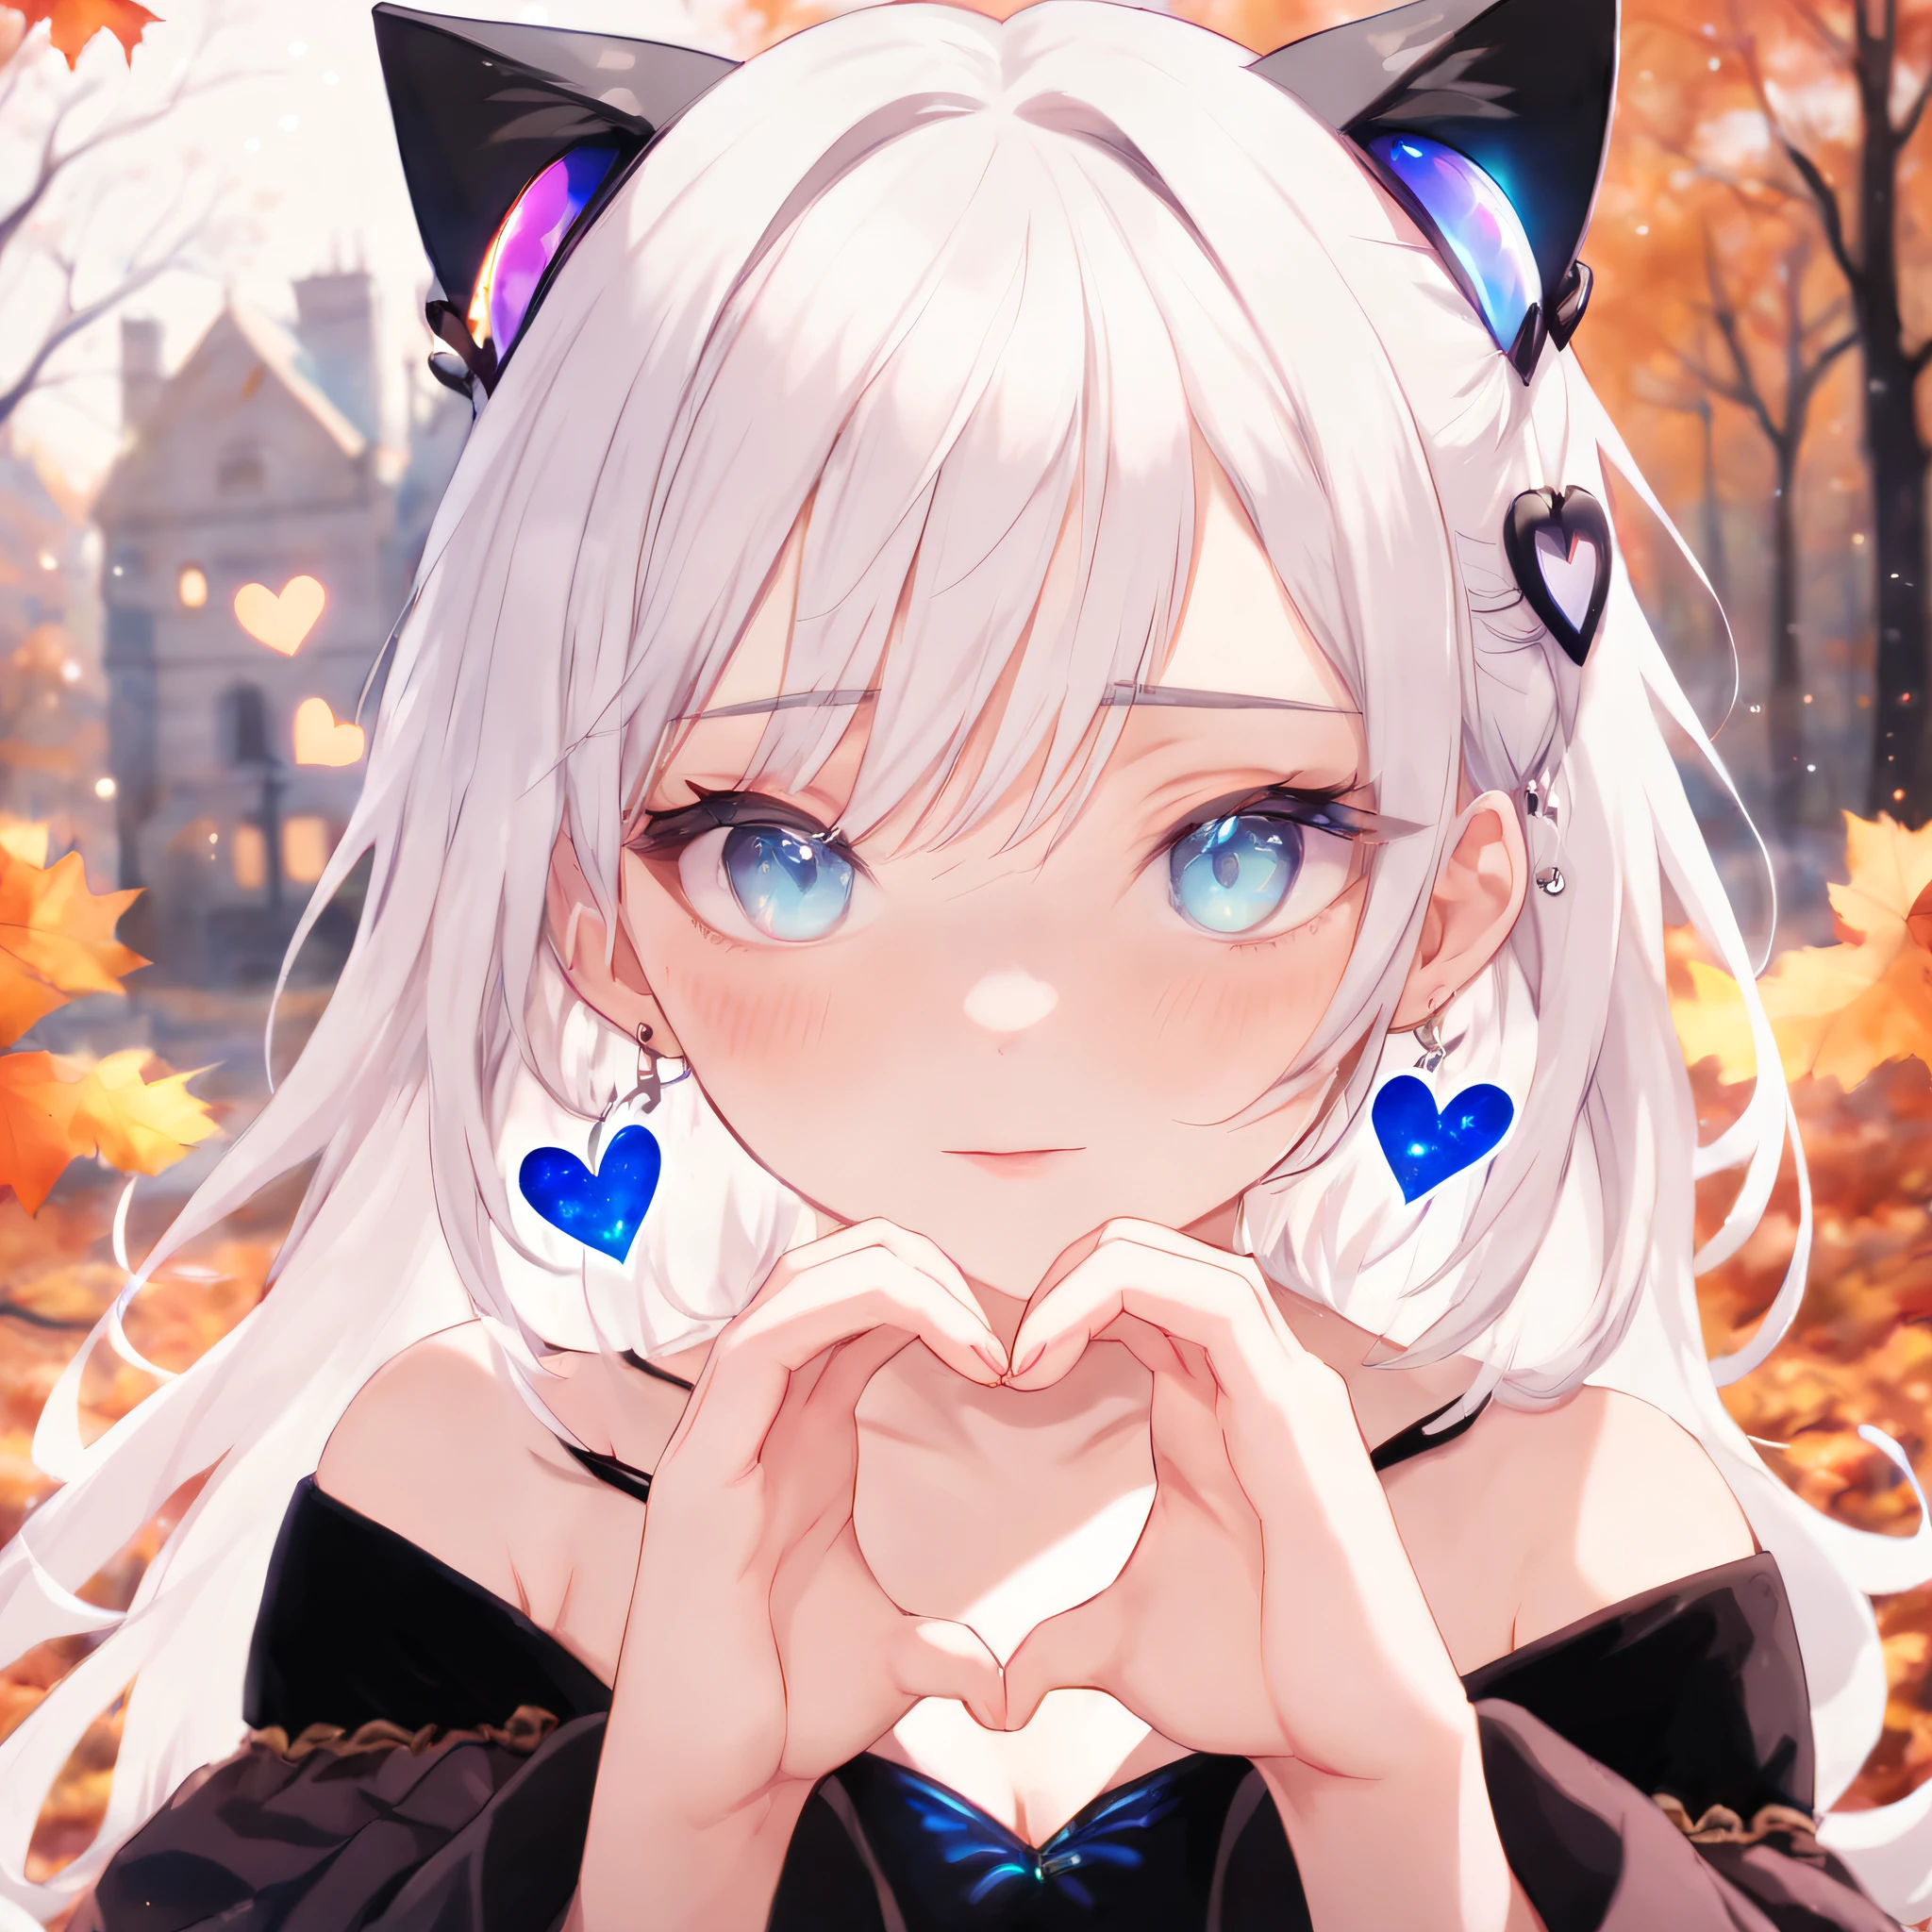 1 girl cat ears,heart shaped hands,Velvet texture earrings，sweetheart,eBlue eyes， Long white hair，bshoulder, shairband, Broken, Extremely luminous and bright design, pastelcolor, (ink:1.3), Autumn lights,(8K, Best quality, tmasterpiece:1.2),(Best quality:1.0), (Ultra-high sharpness:1.0)